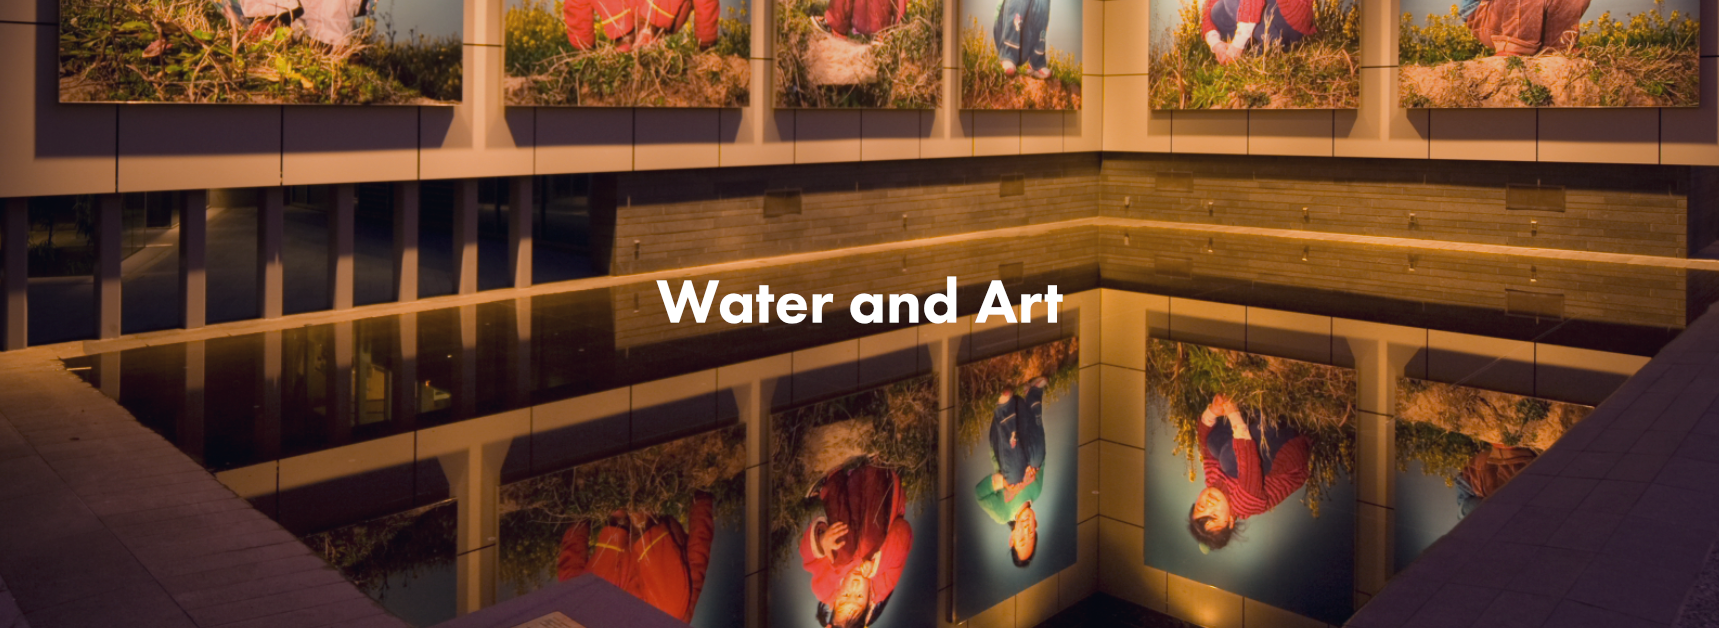 water and art